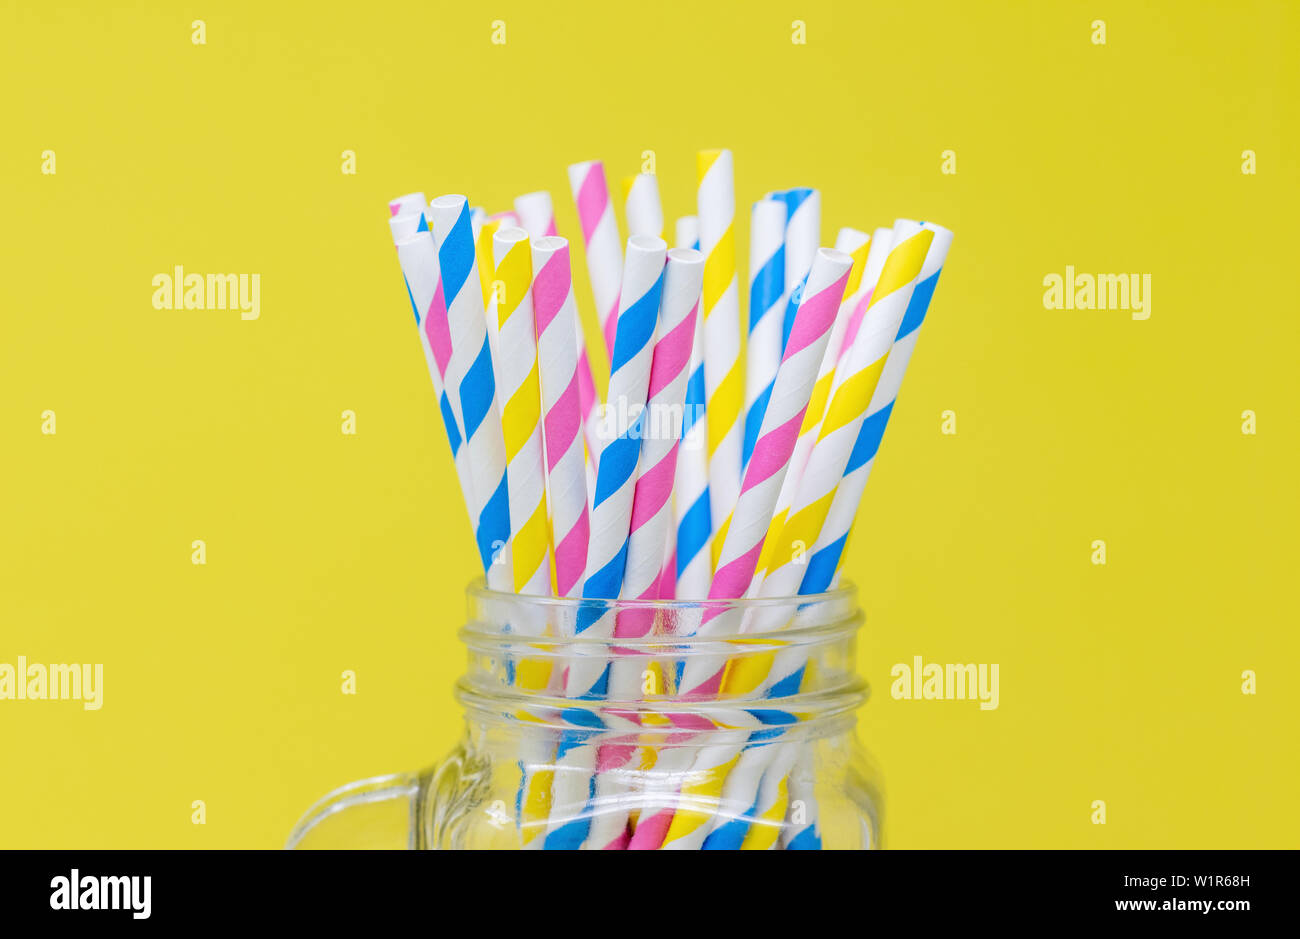 Colorful paper straws in a glass jar. with a yellow background. Closeup with a shallow depth of field. Stock Photo